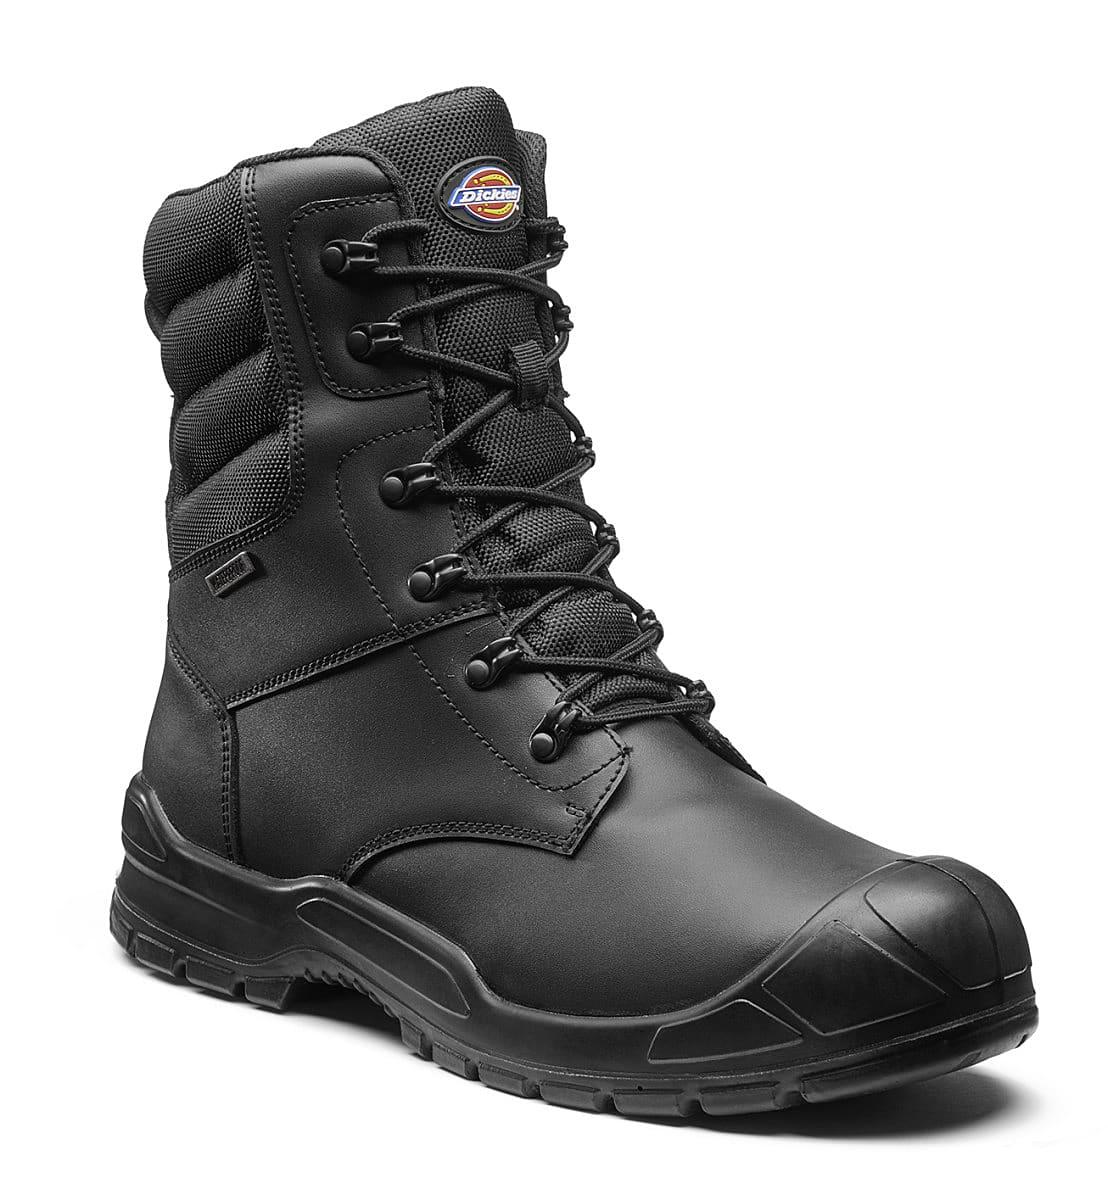 Dickies Trenton Pro Safety Boots in Black (Product Code: FD9218)